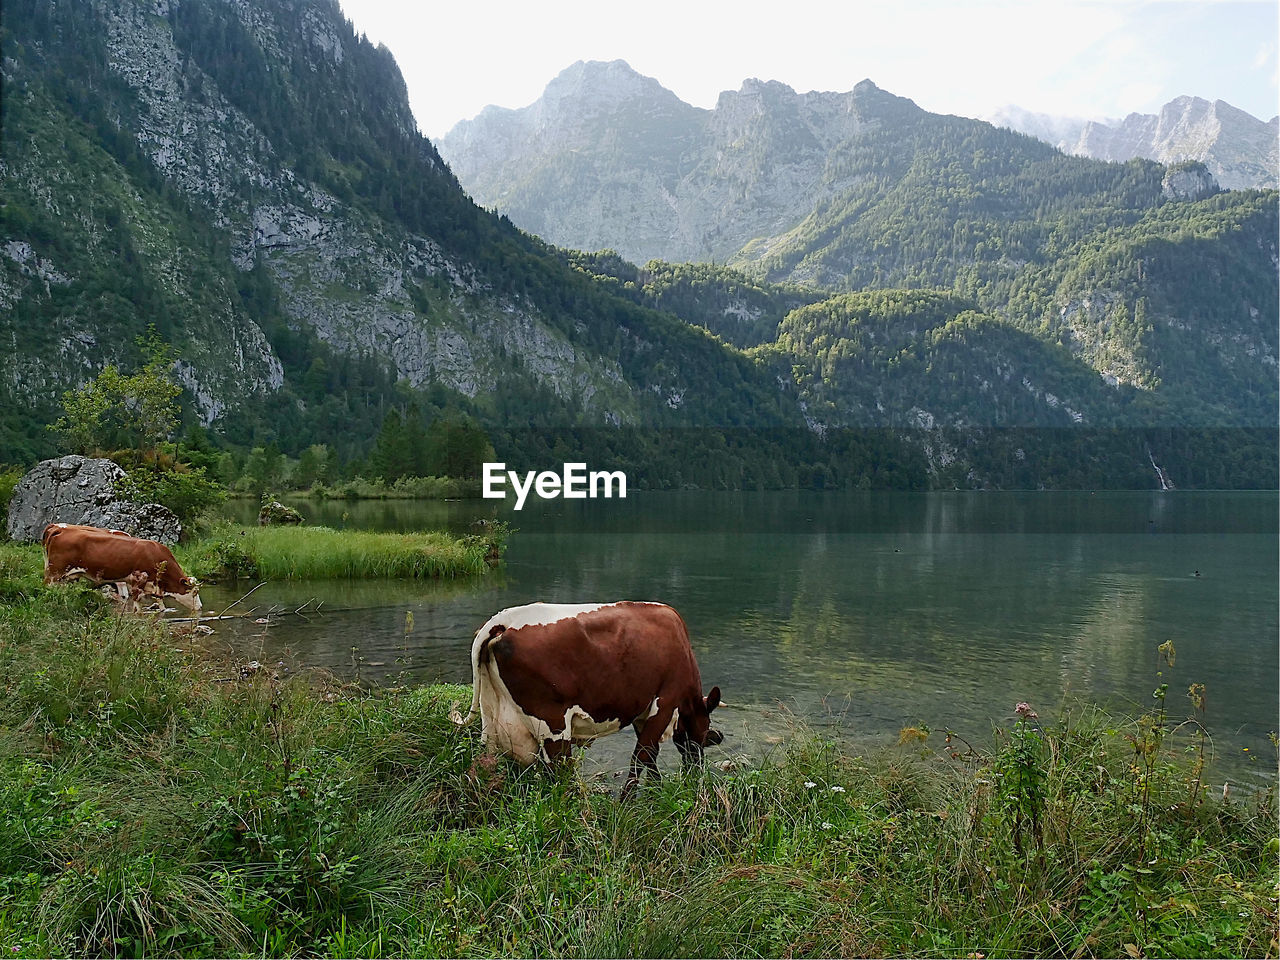 VIEW OF A HORSE IN LAKE